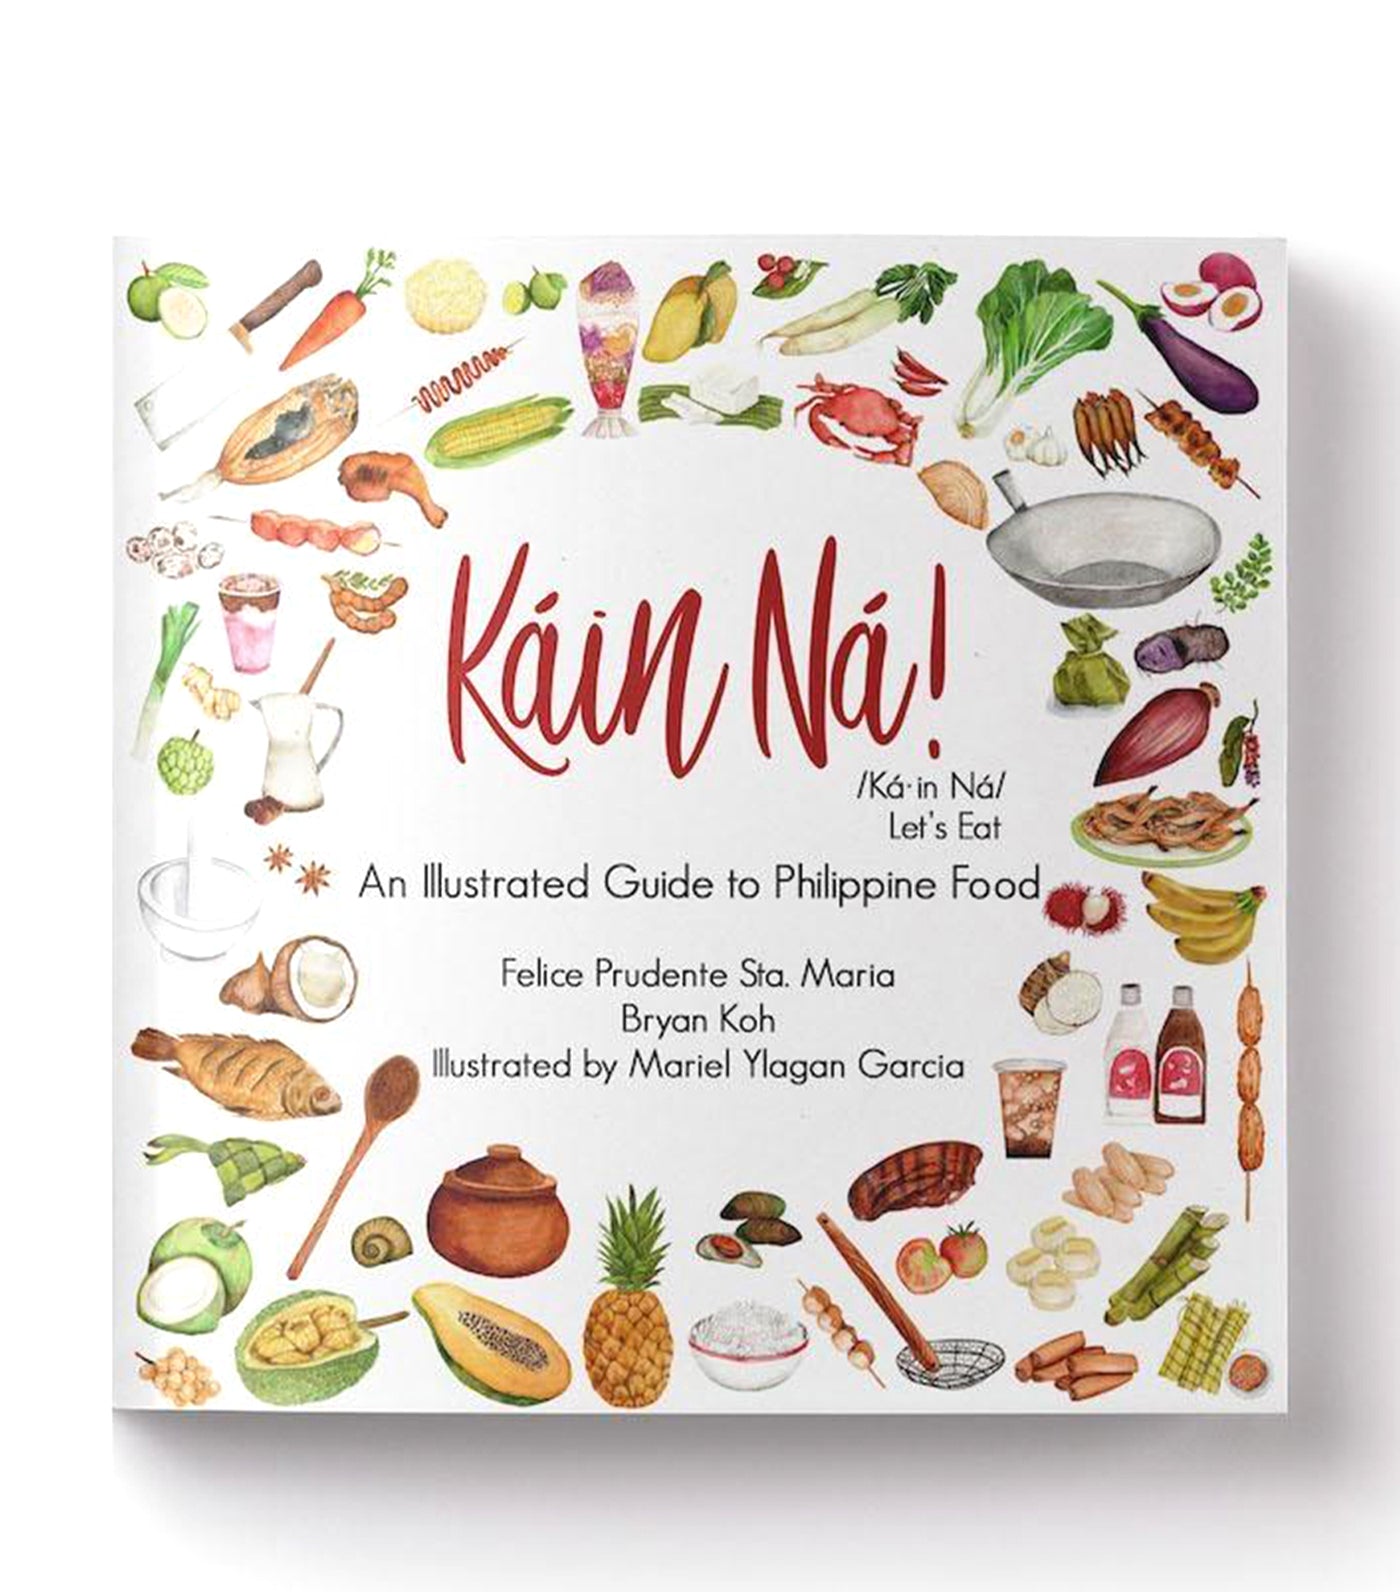 Káin Ná! An Illustrated Guide to Philippine Food by Felice Prudente Sta. Maria, Bryan Koh